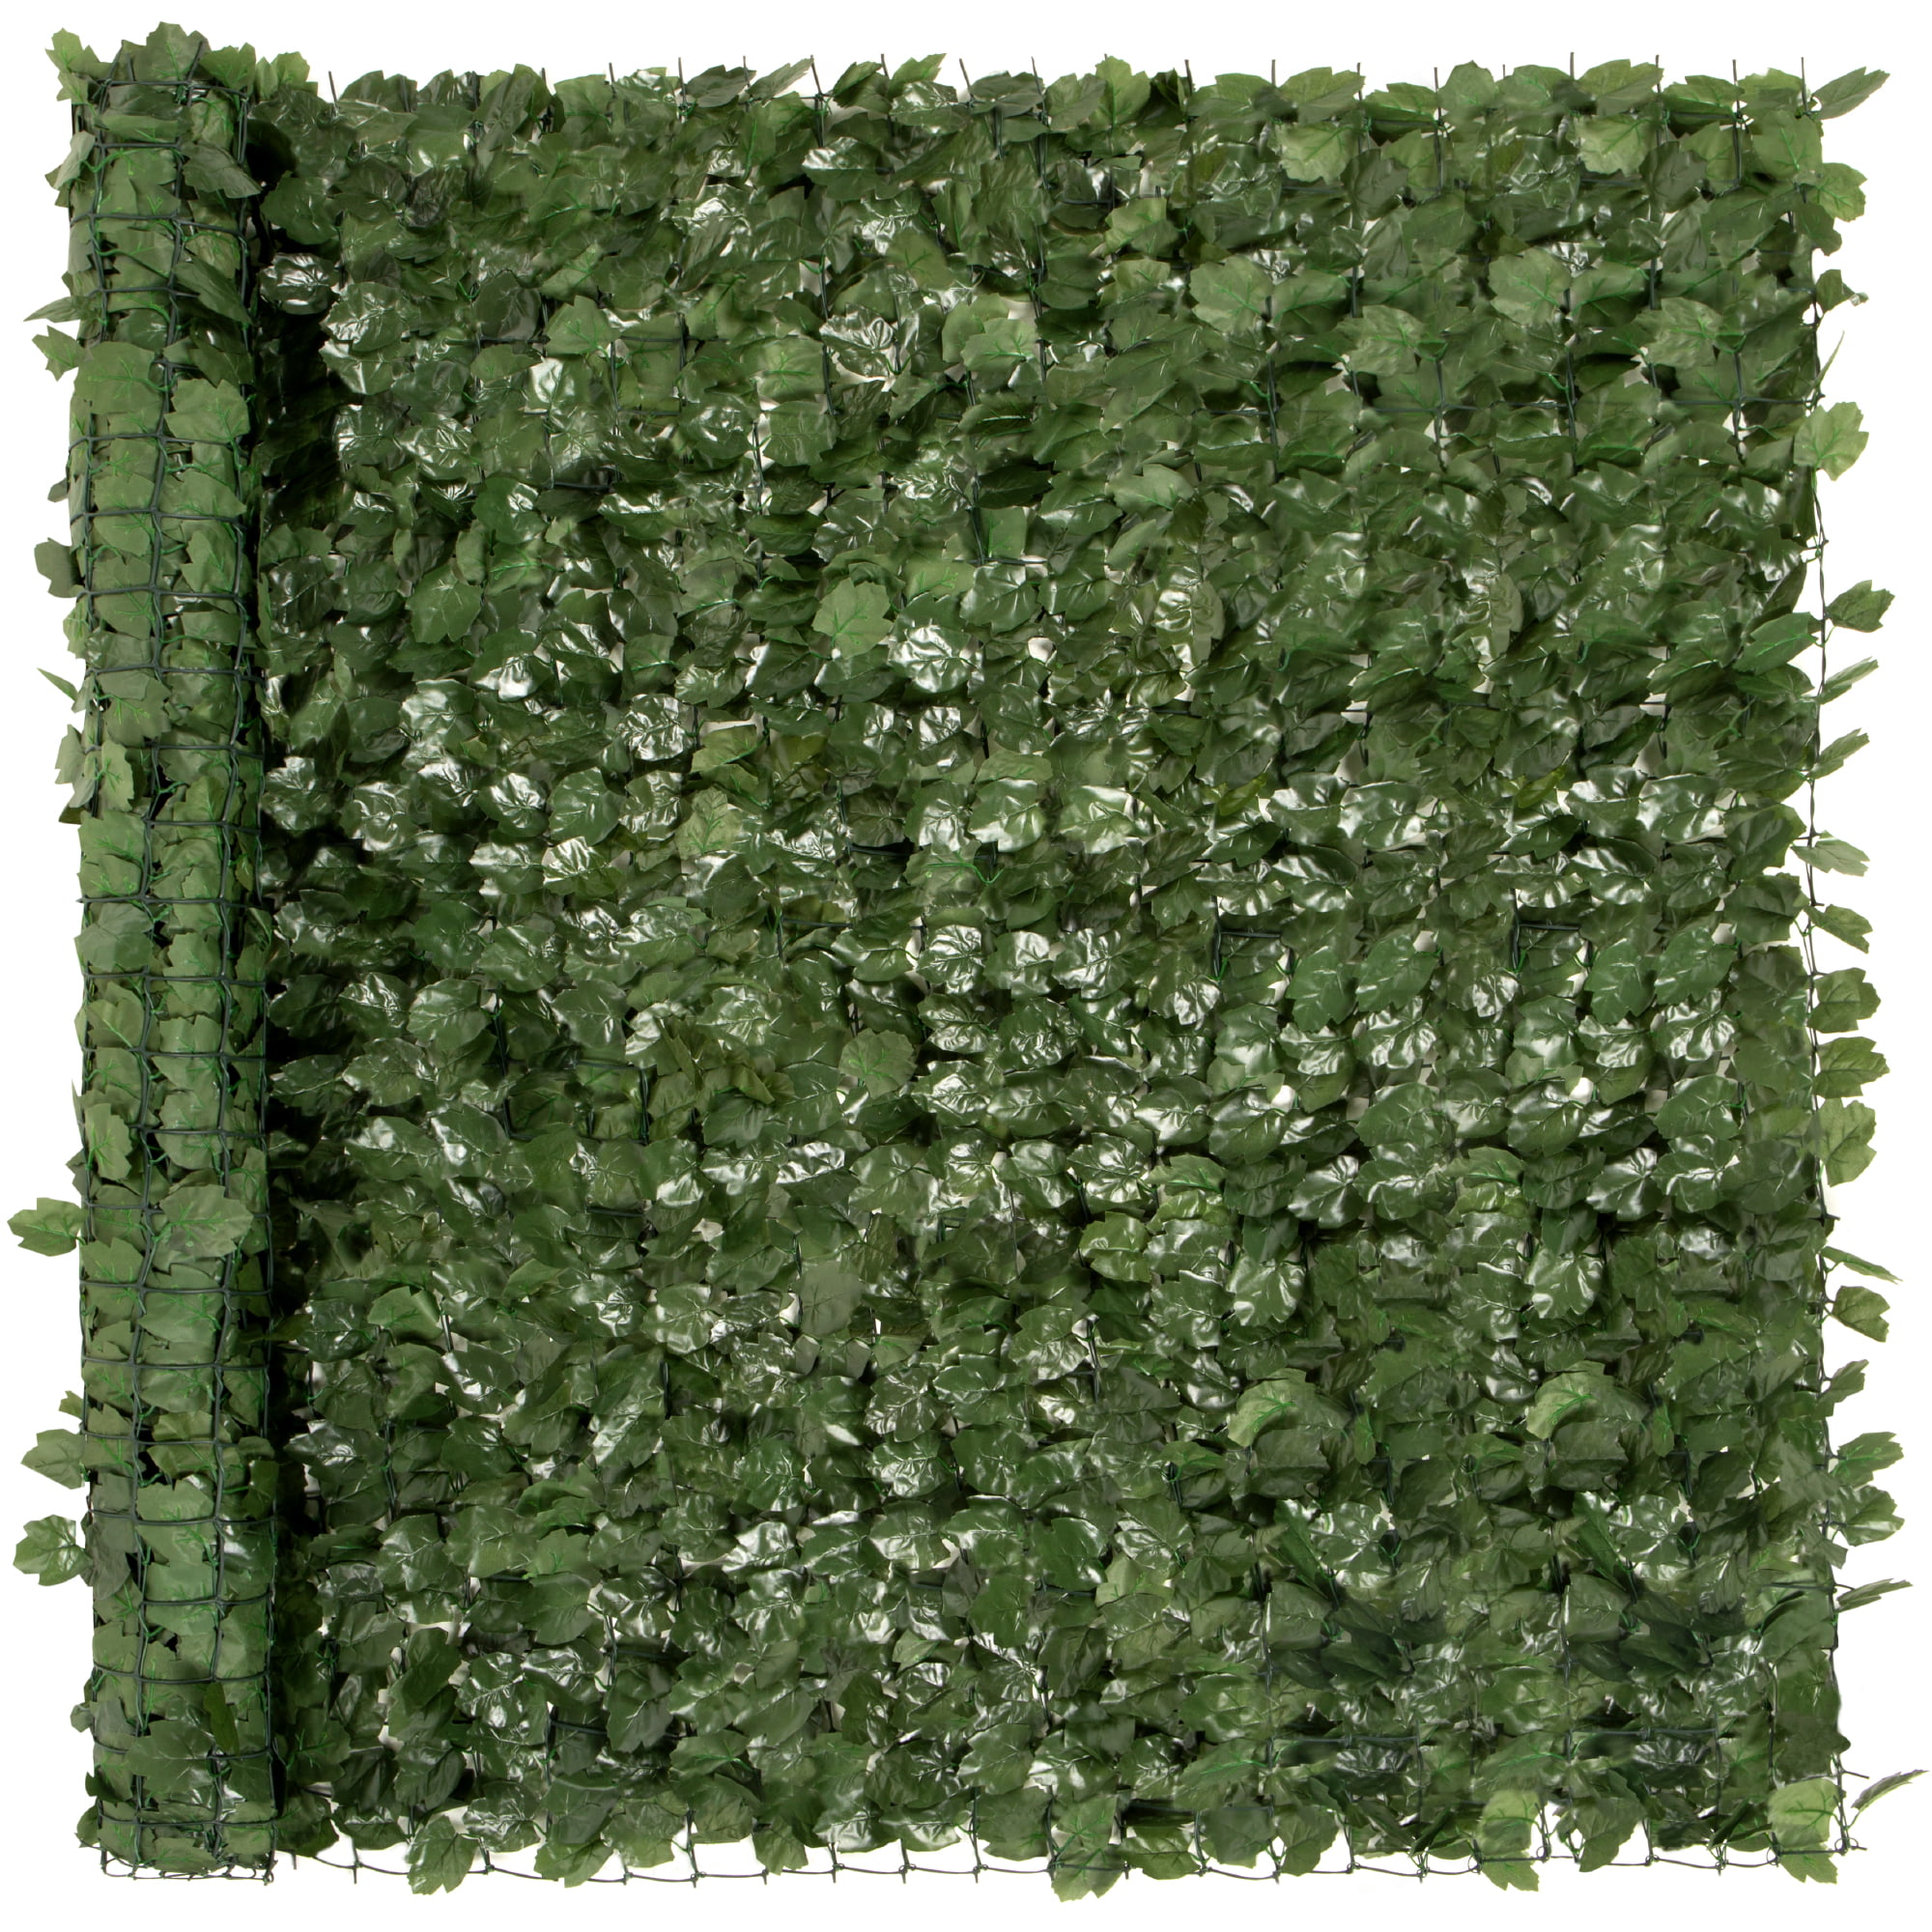 Artificial Fake Ivy Leaf Foliage Privacy Fence Screen Garden Panel Hedge Decors 